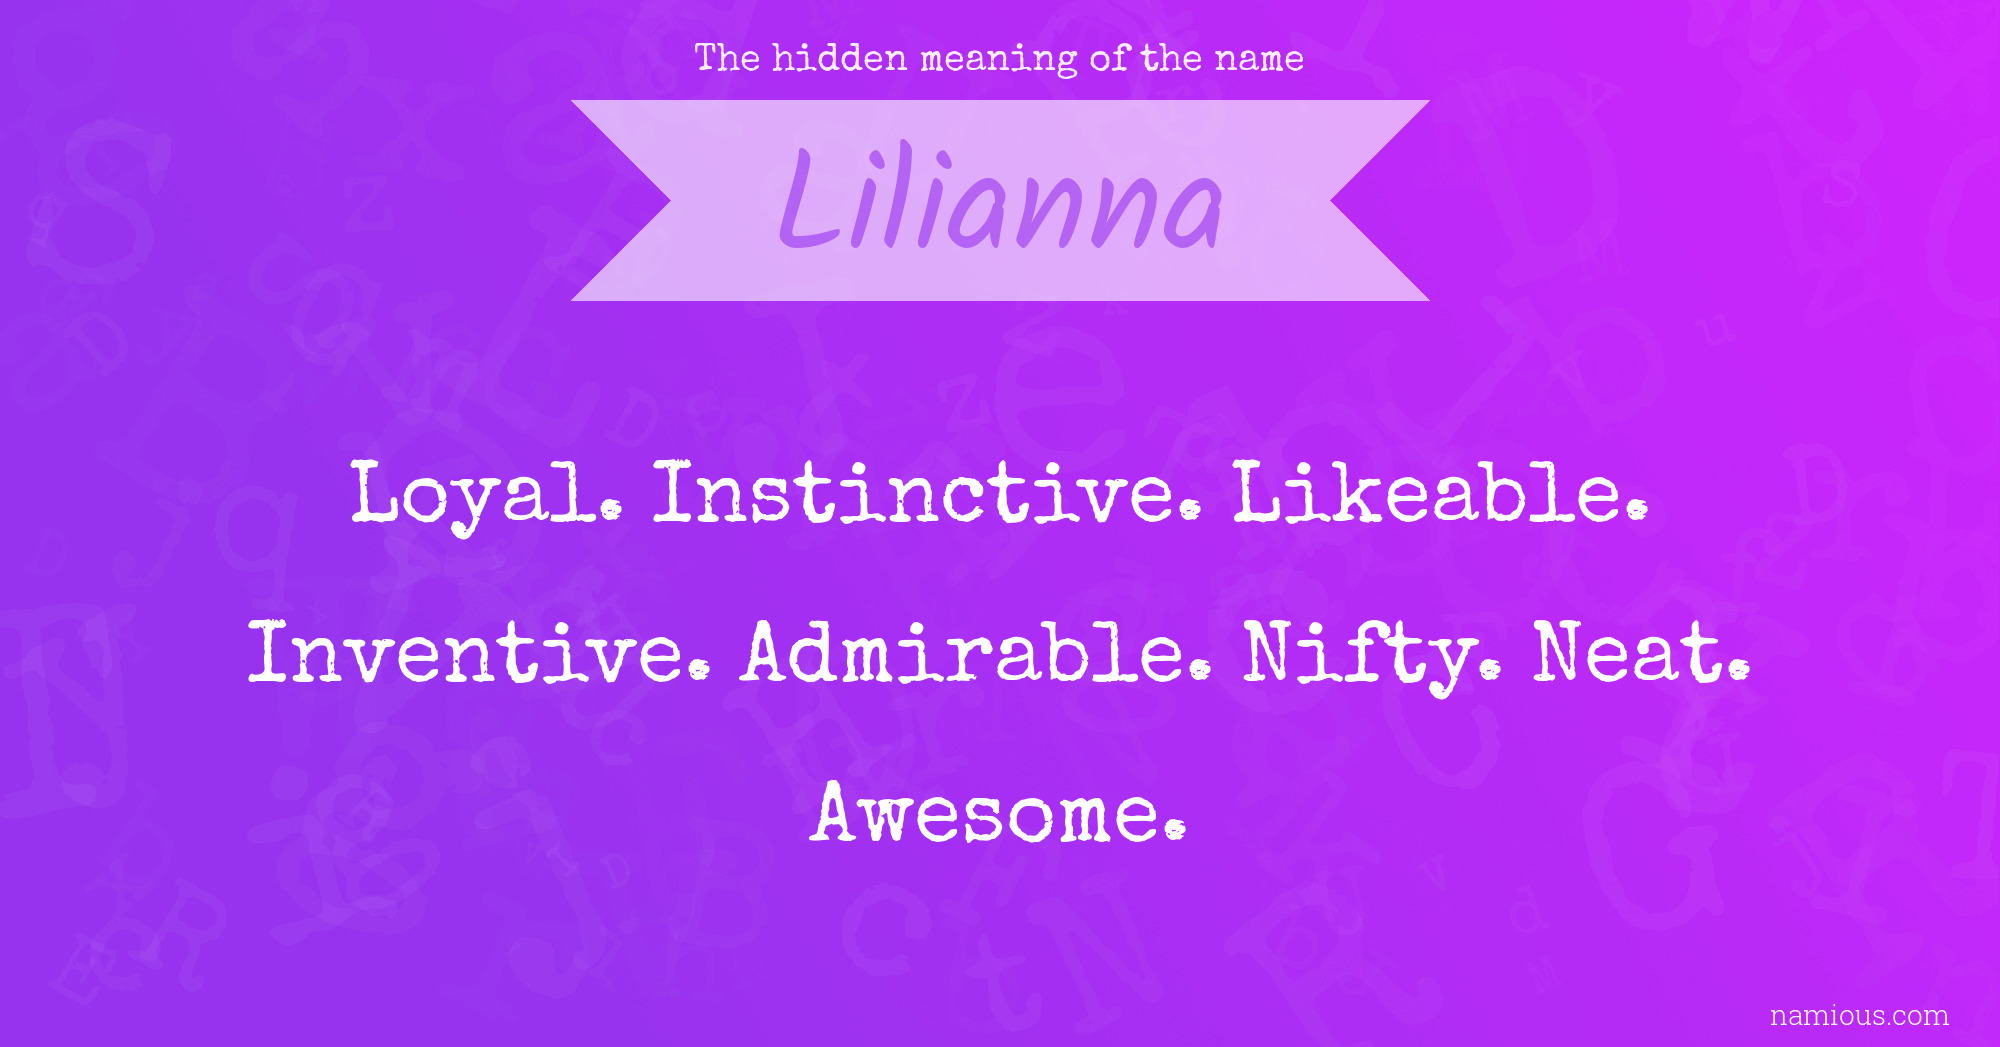 The hidden meaning of the name Lilianna